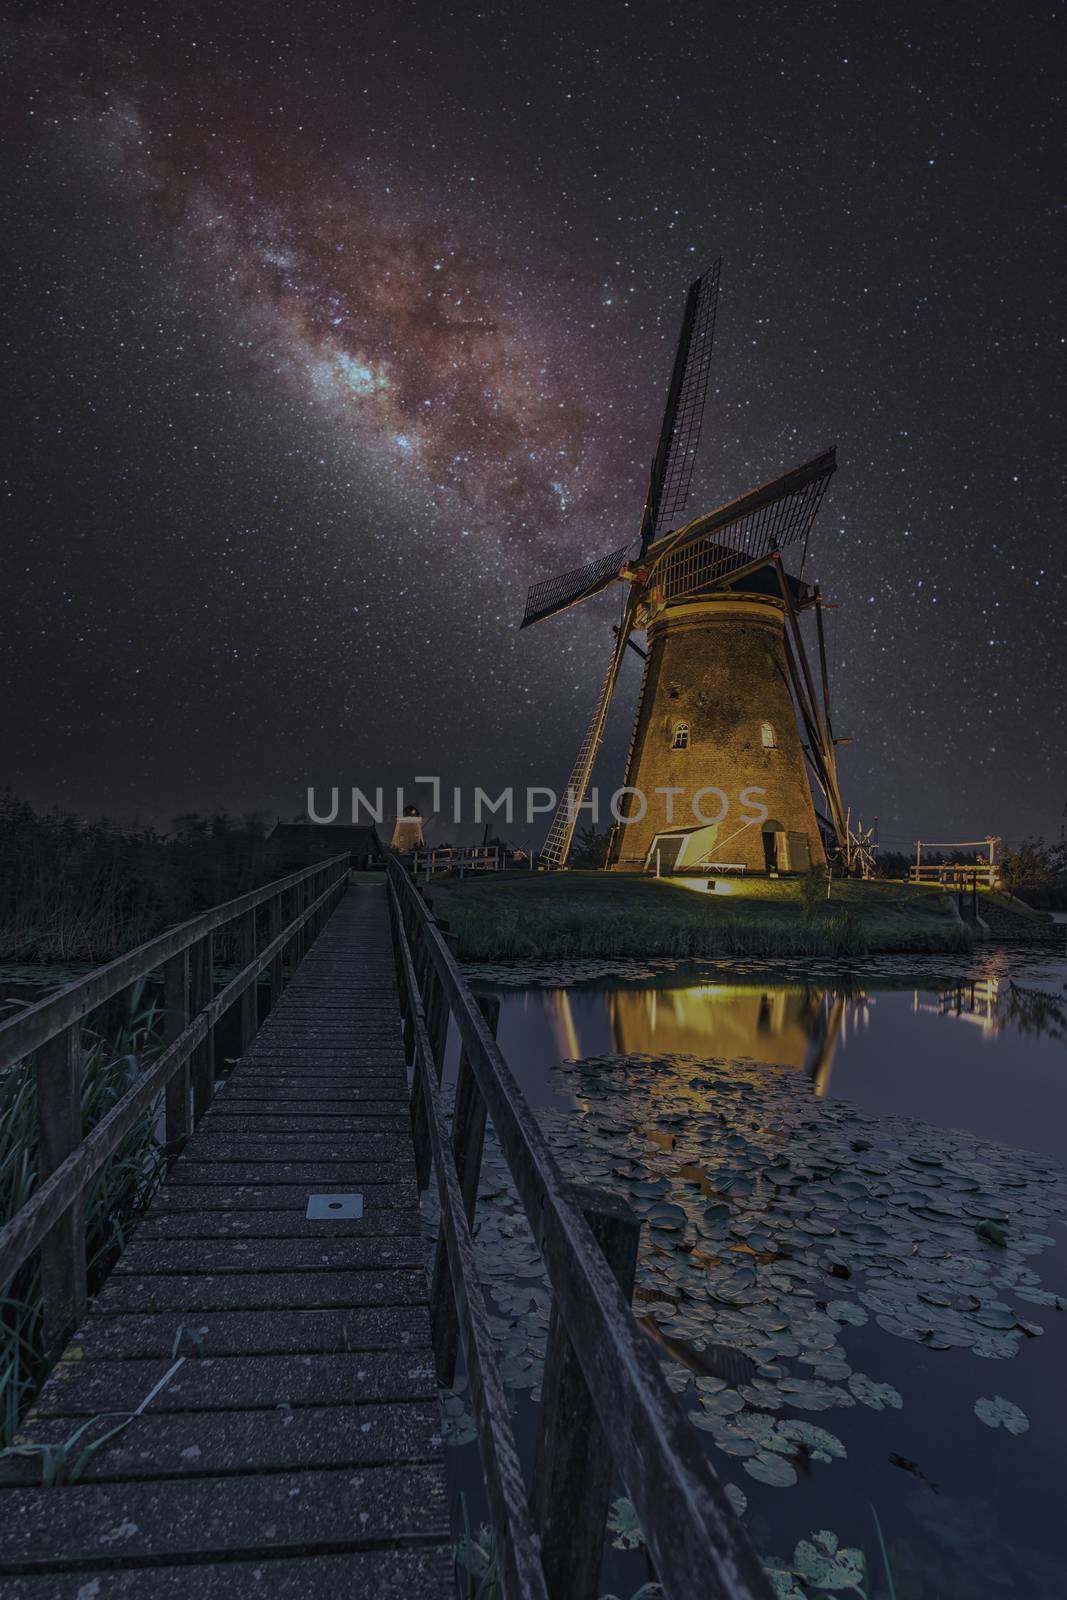 Milky way on the windmill servicing its duty under a warm cloudless and warm weather at Kinderdijk, Netherlands by ankorlight